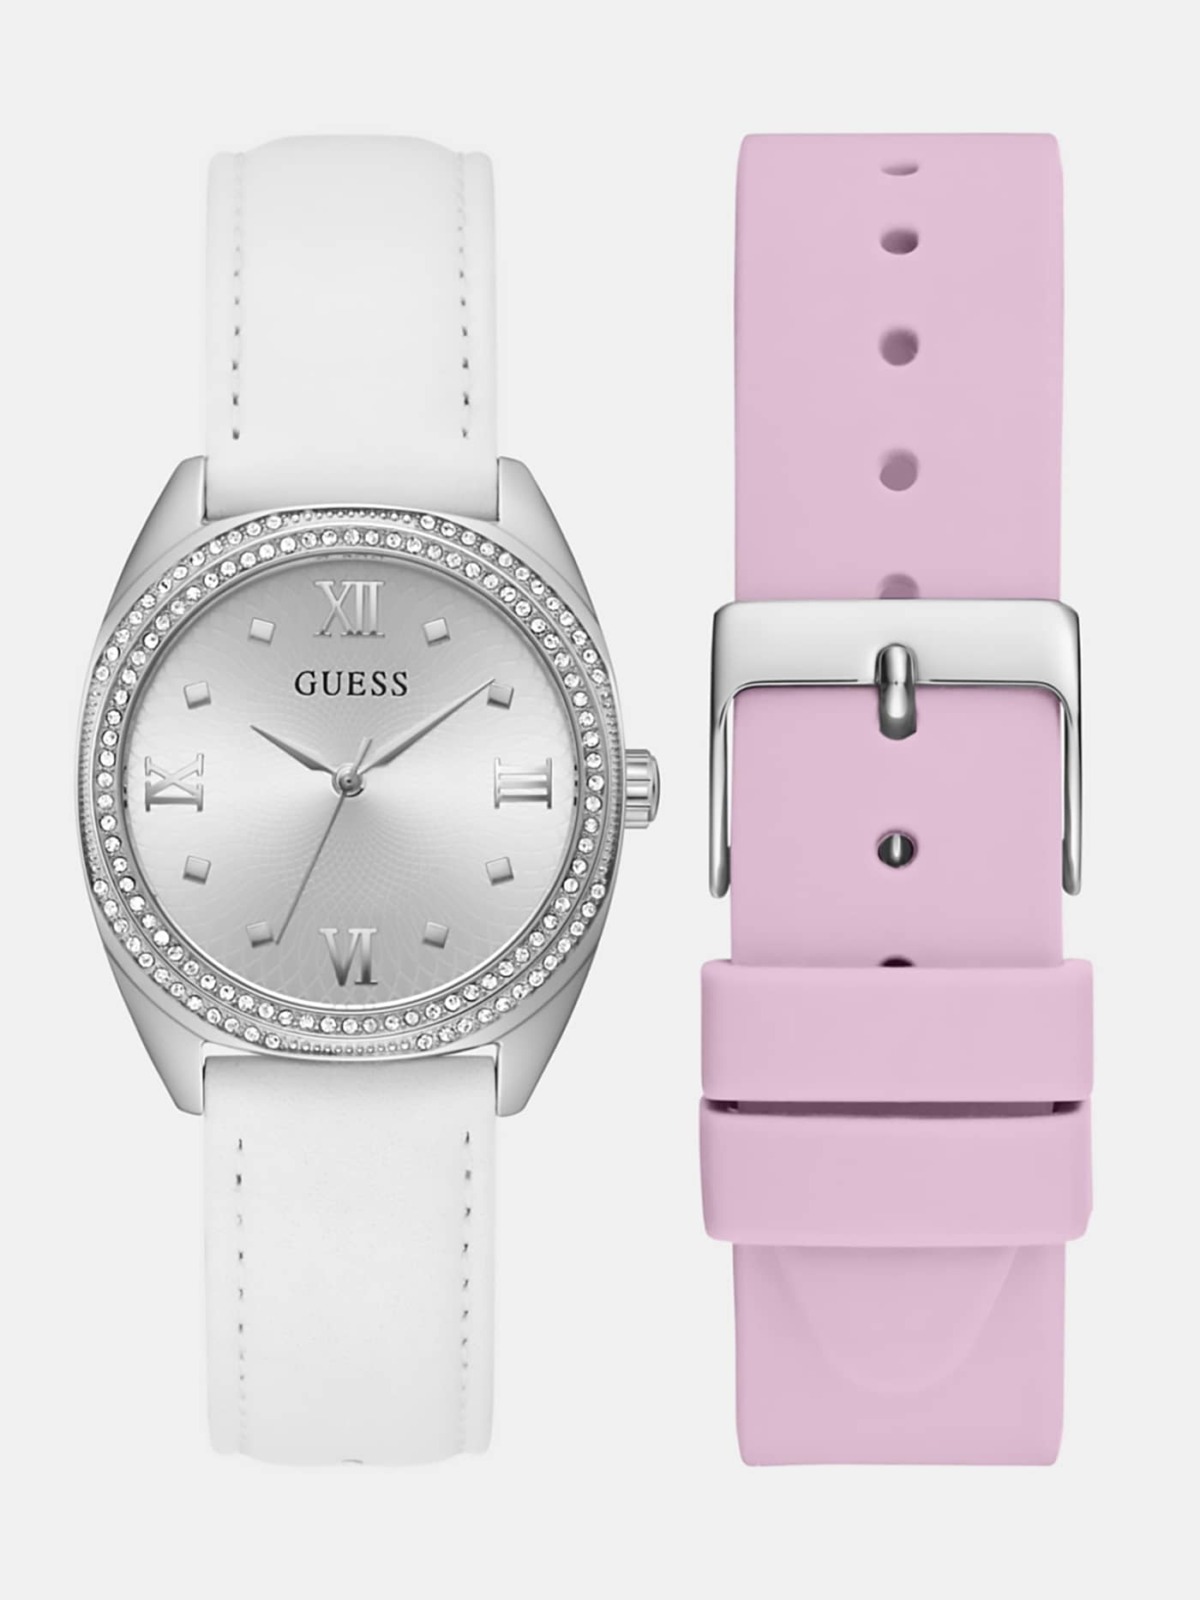 Womens Watch in Rose at Guess GOOFASH